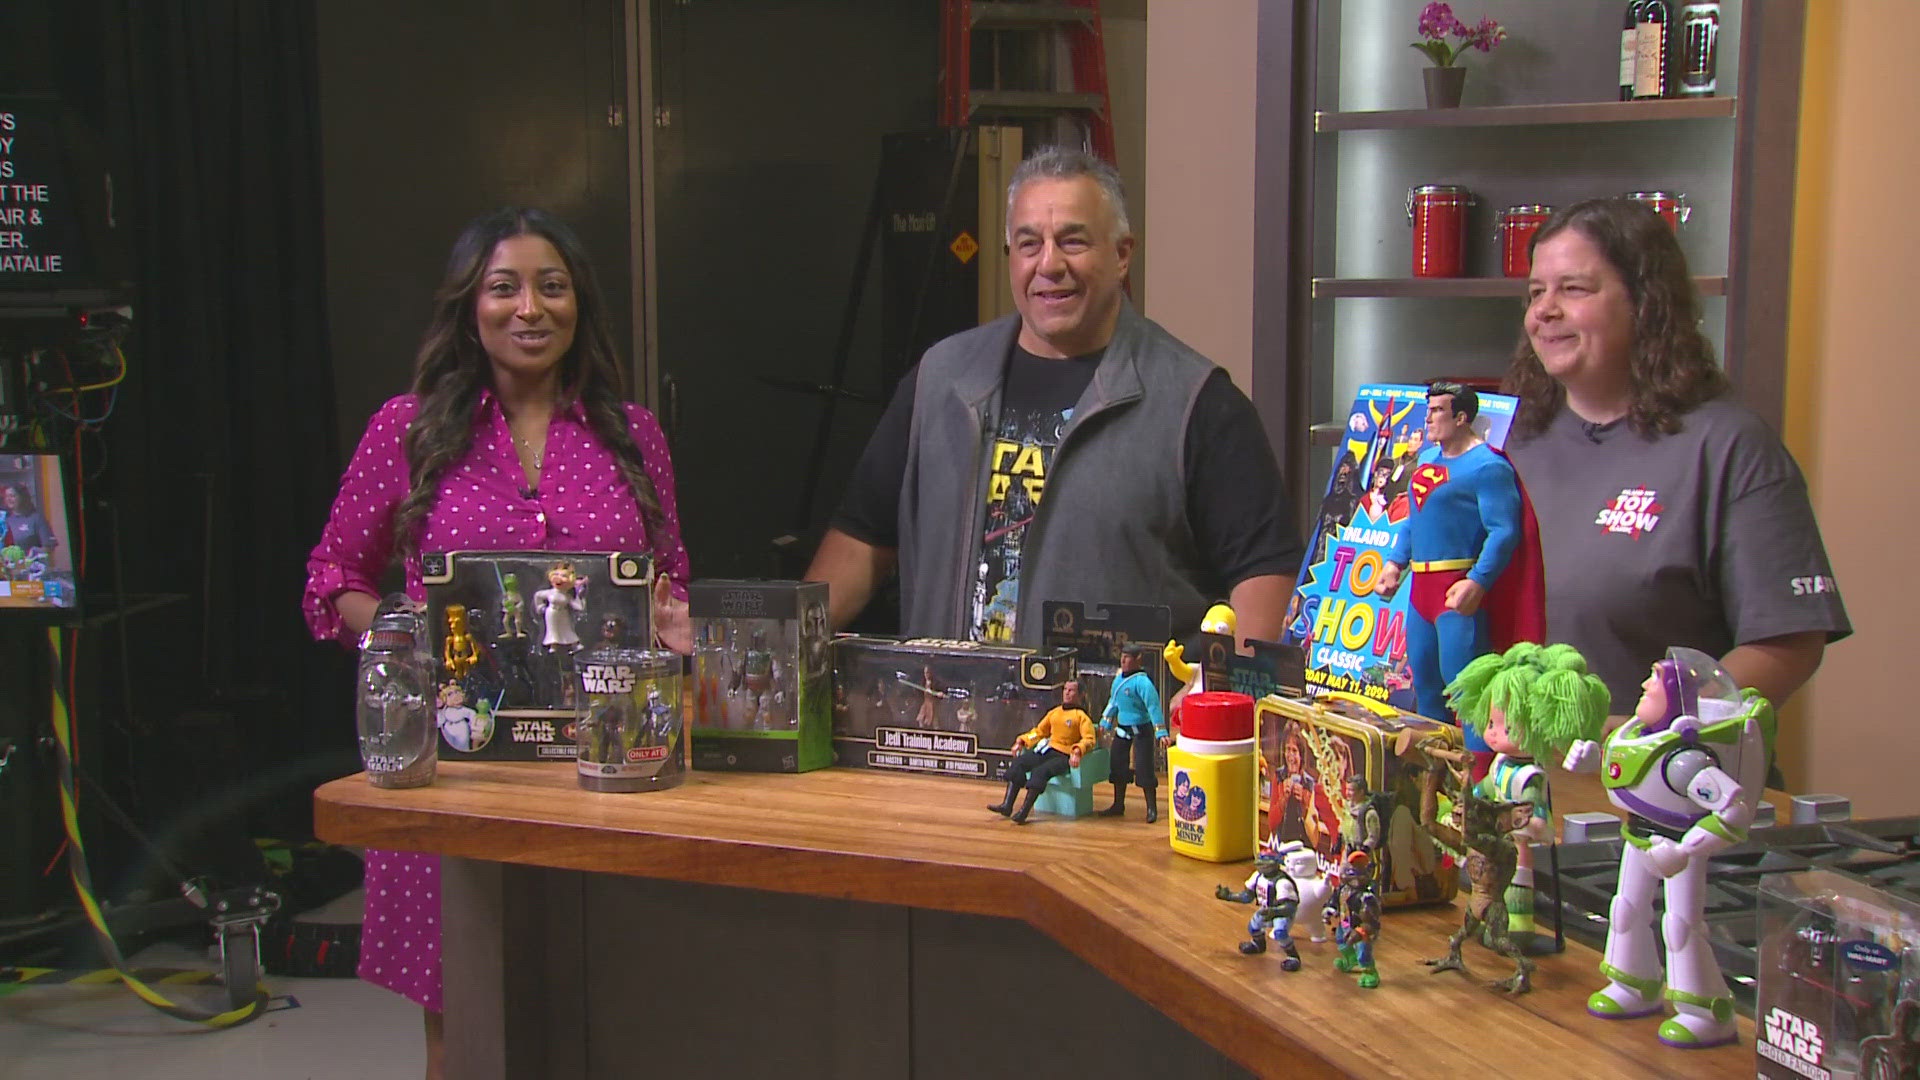 Matt Keller and Natalie Barrick talked about Saturday’s toy show and what attendees can expect.